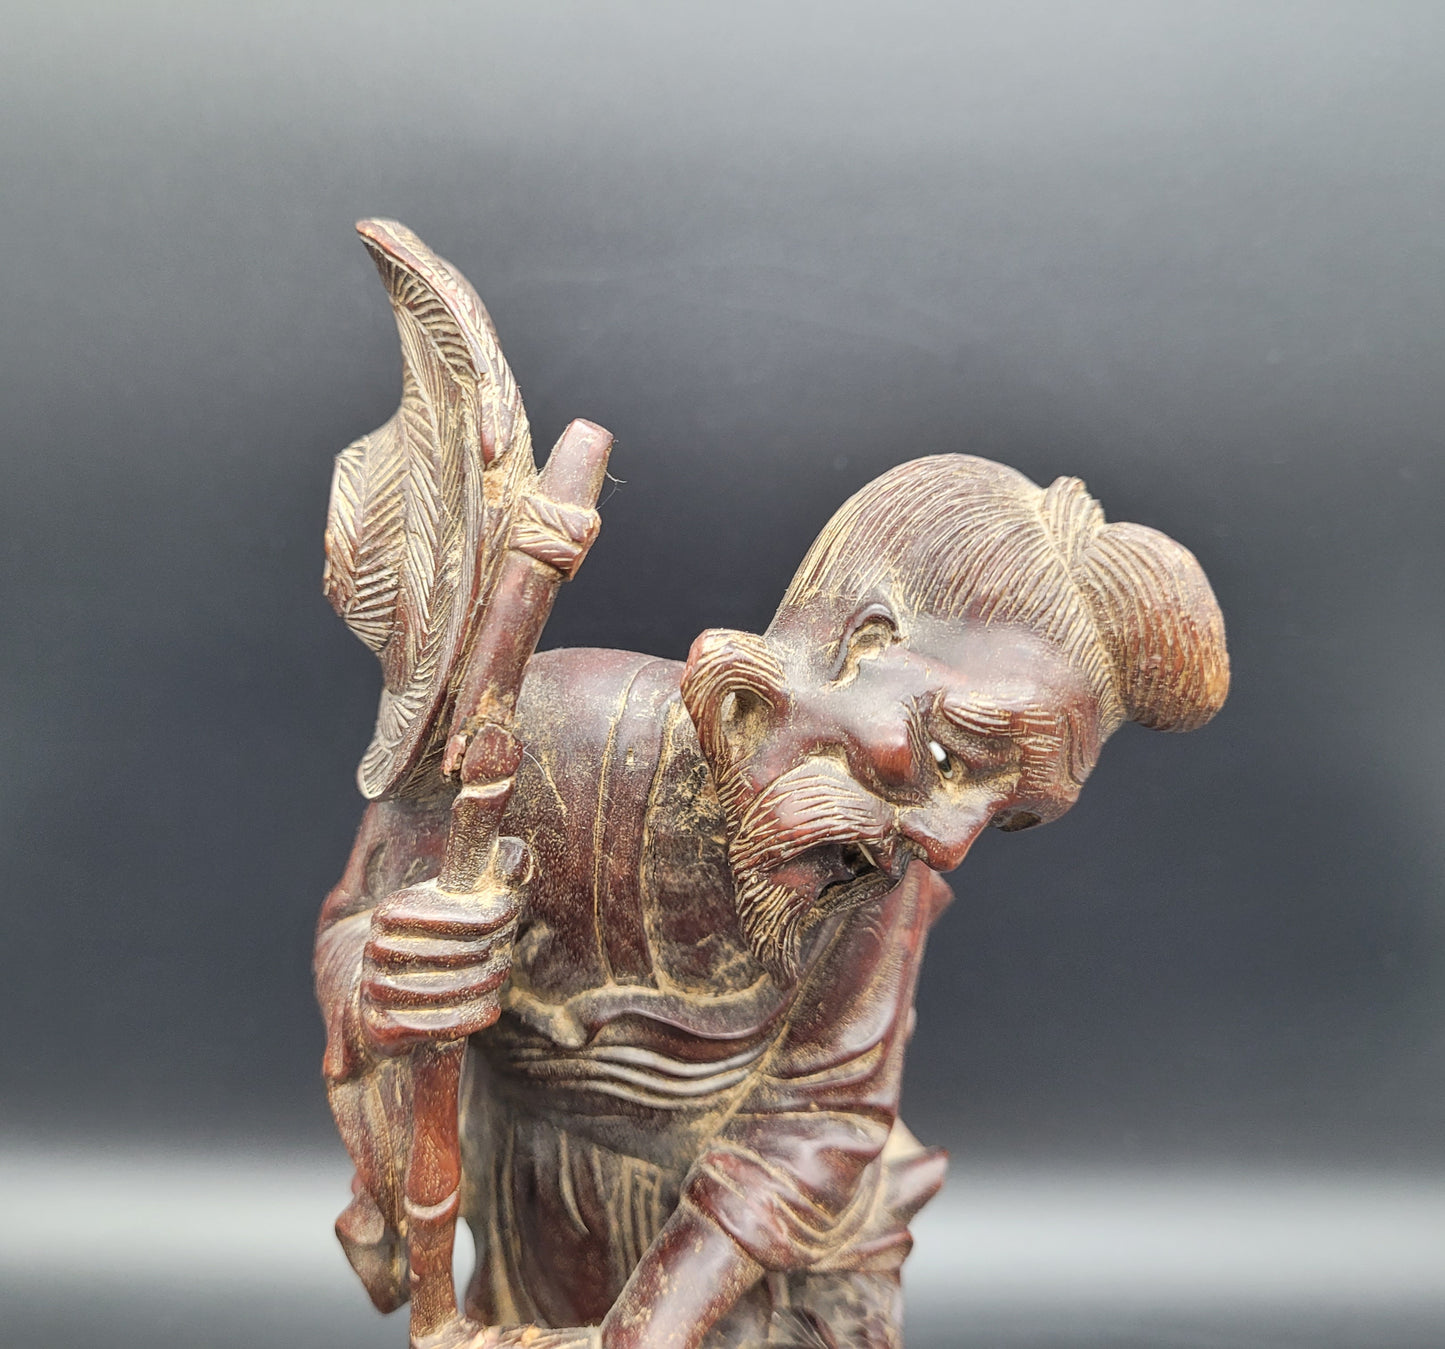 Antique Chinese 19th Century Wood Carving Fisherman Figure